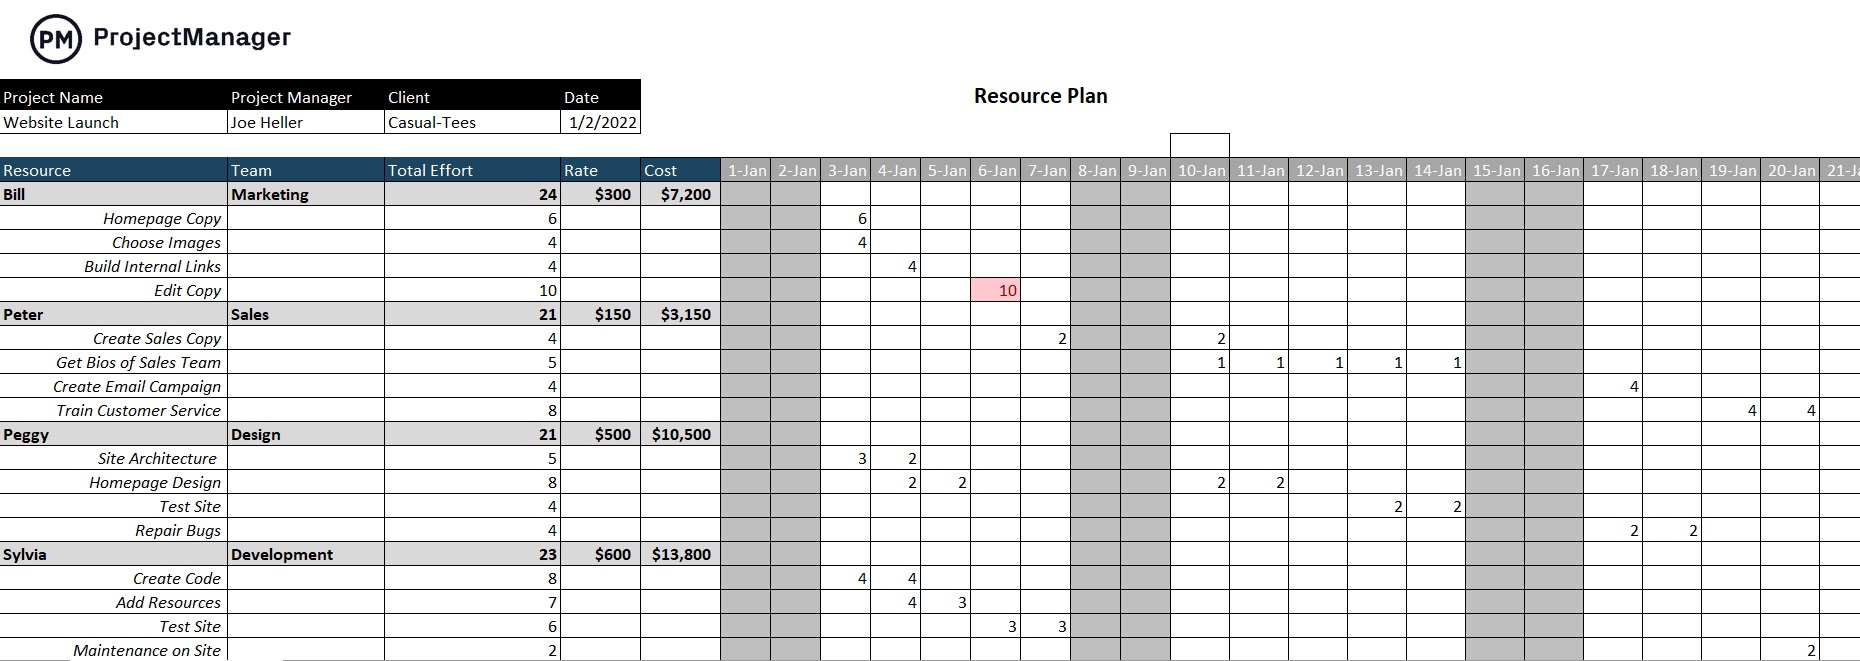 Resource Plan Template for Excel (Free Download)